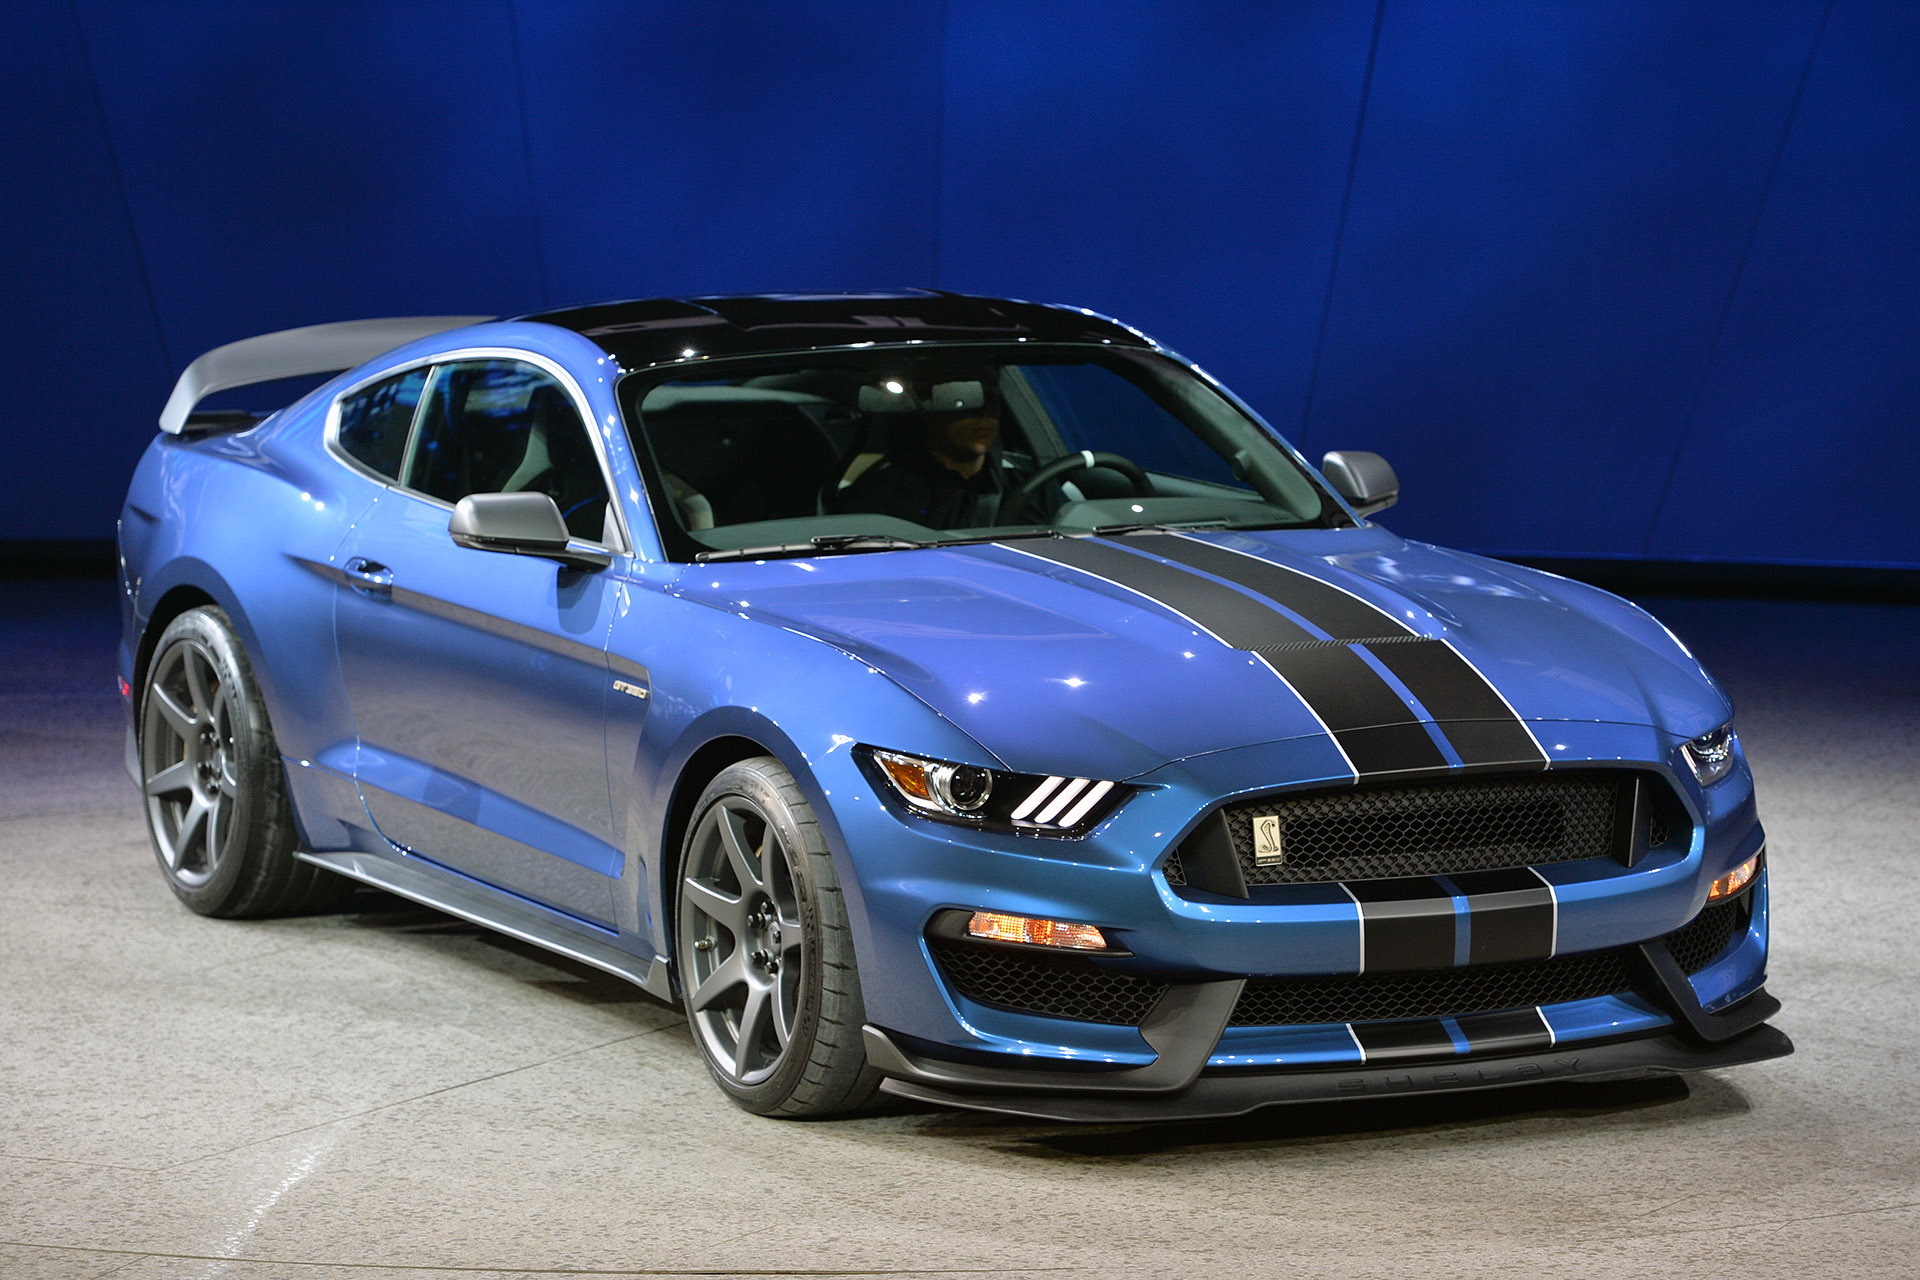 2016 Ford Shelby GT350R: Detroit 2015 Photo Gallery